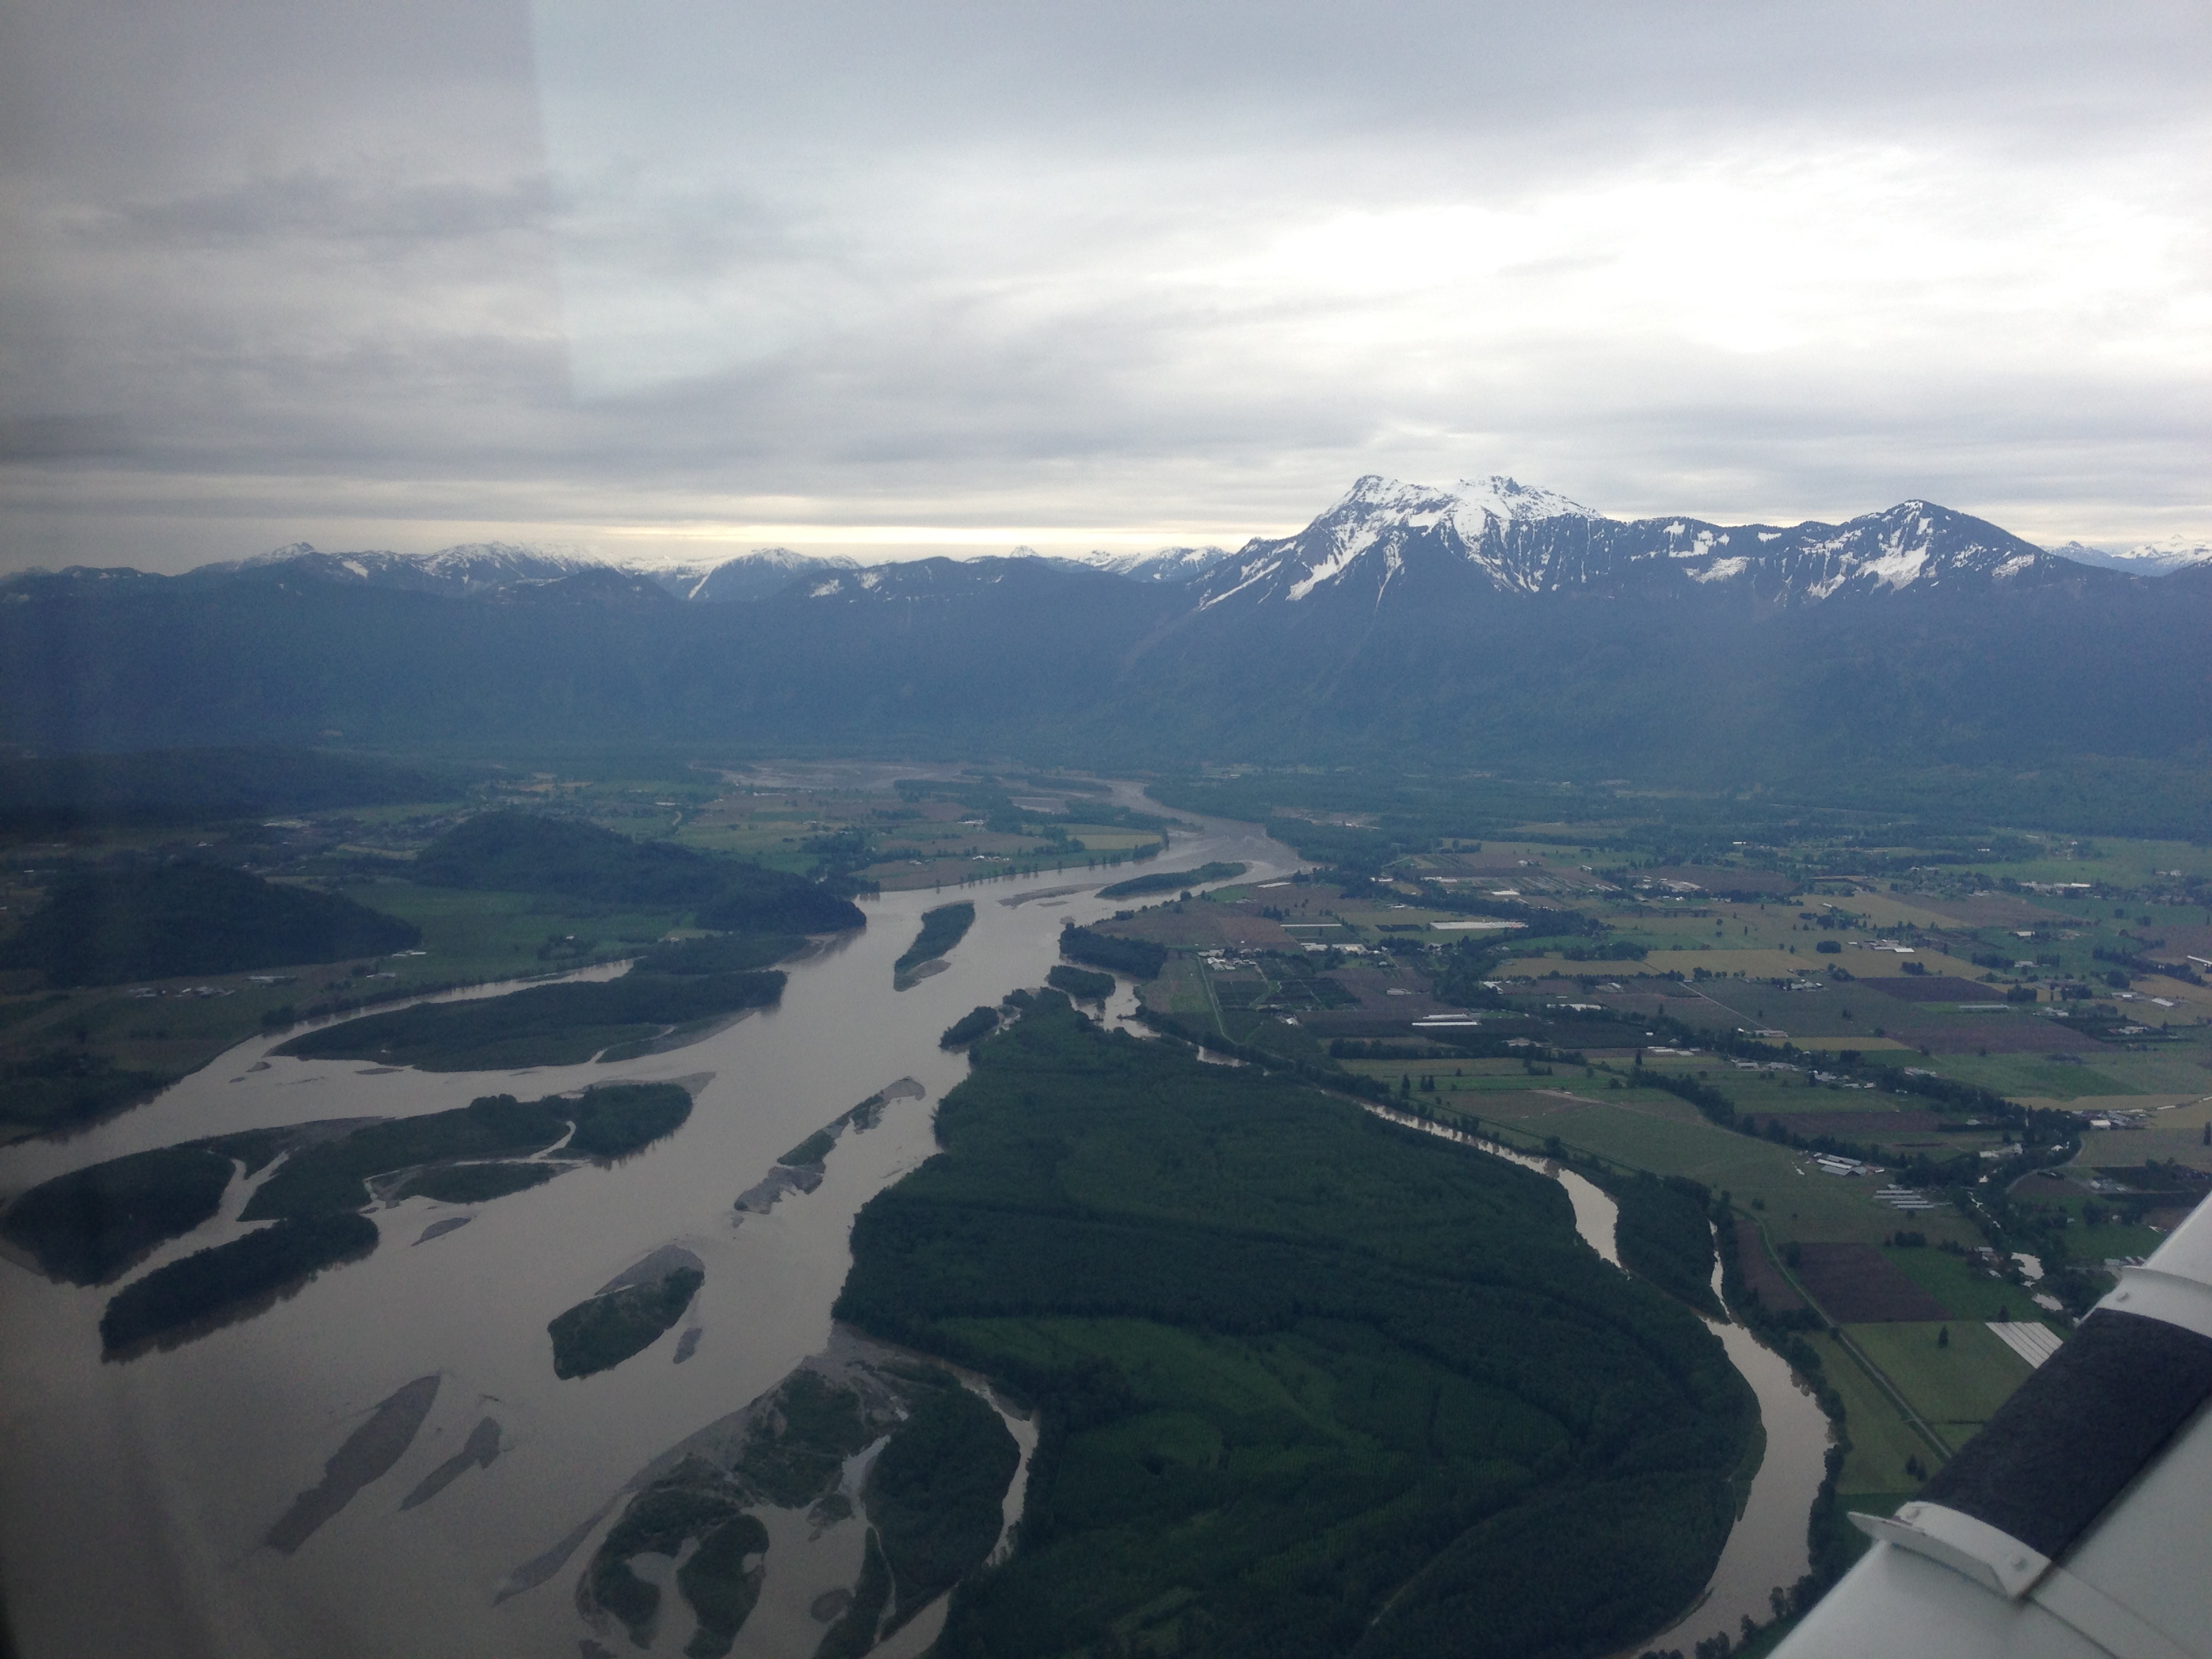 A few miles northeast of Chilliwack (CYCW), looking southeast